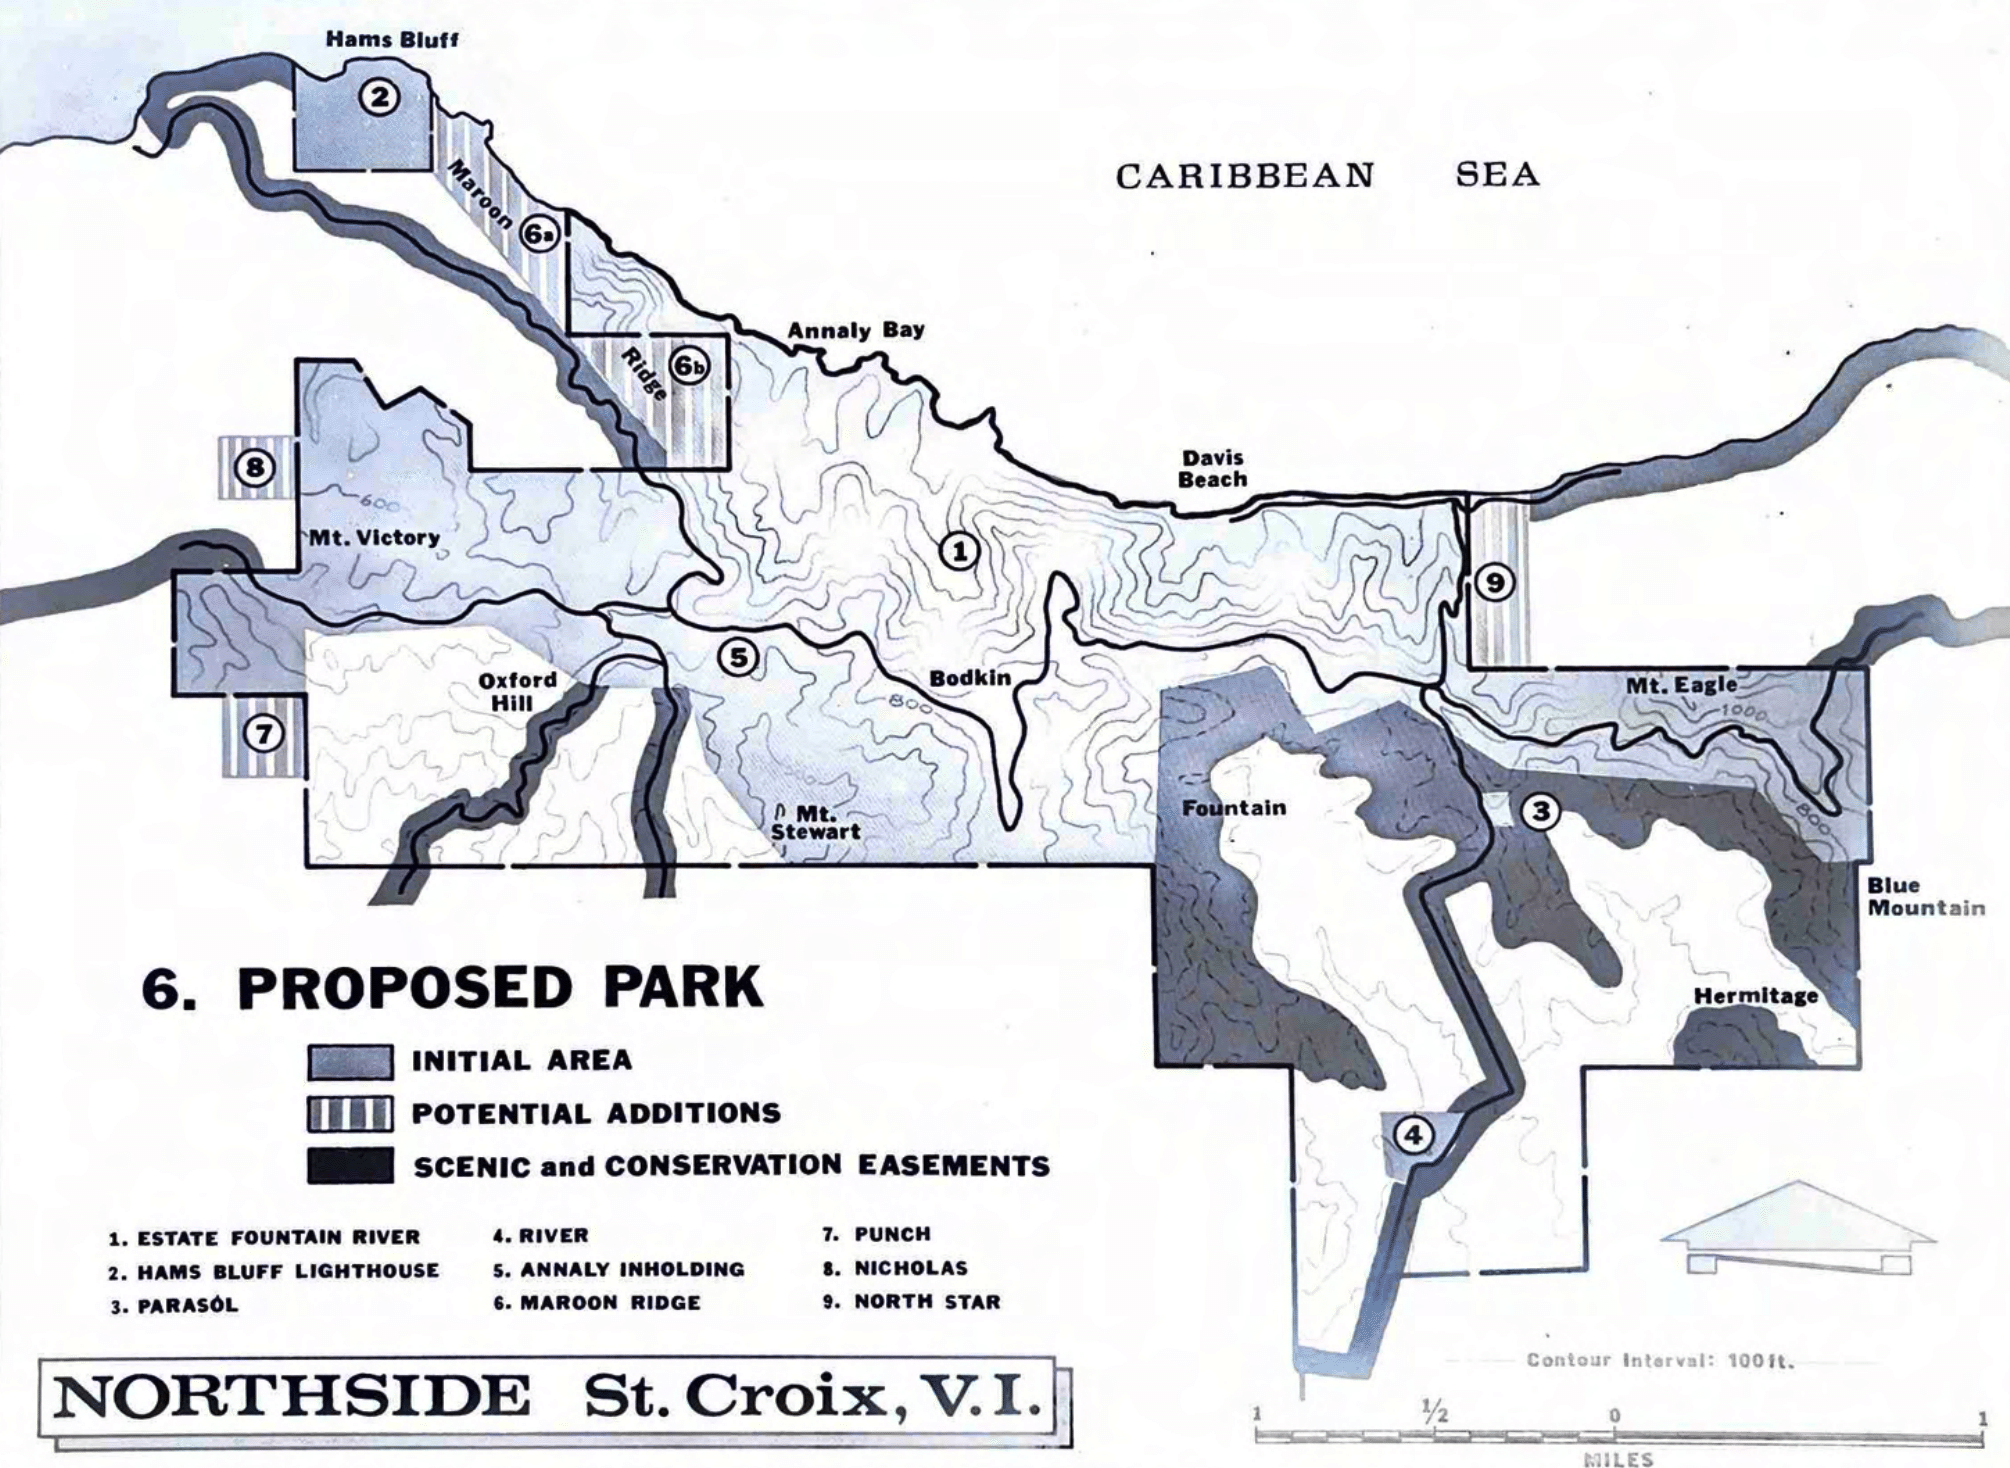 In 1969, this was the proposed regional park boundaries of the Great Northwest of St. Croix. When I read the document of the northwest of St. Croix to set aside land for the people of these islands as the people territorial park, I wanted to cry because we have dropped the ball repeatedly. The question comes to mind why the northwest park didn’t happen over a half century ago?